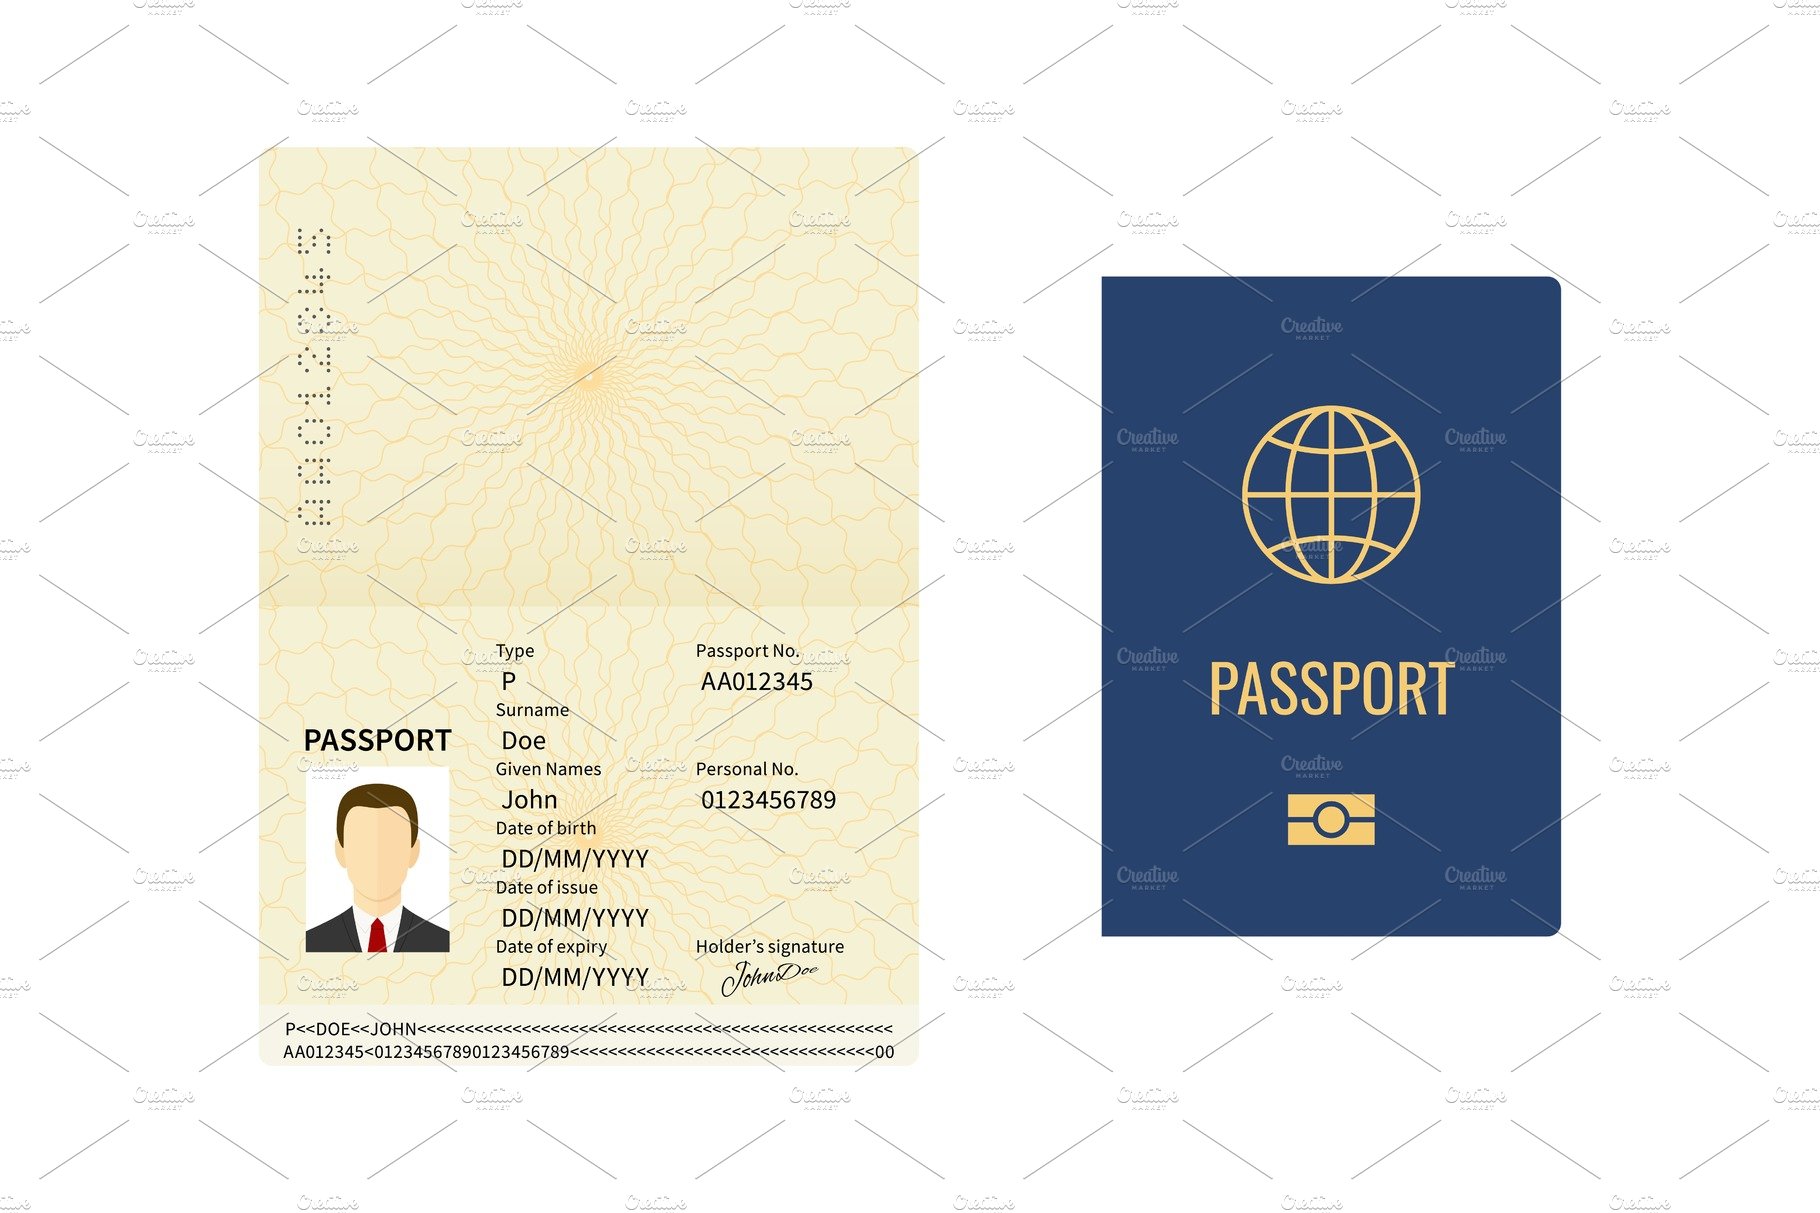 Passport template. Closed and open cover image.